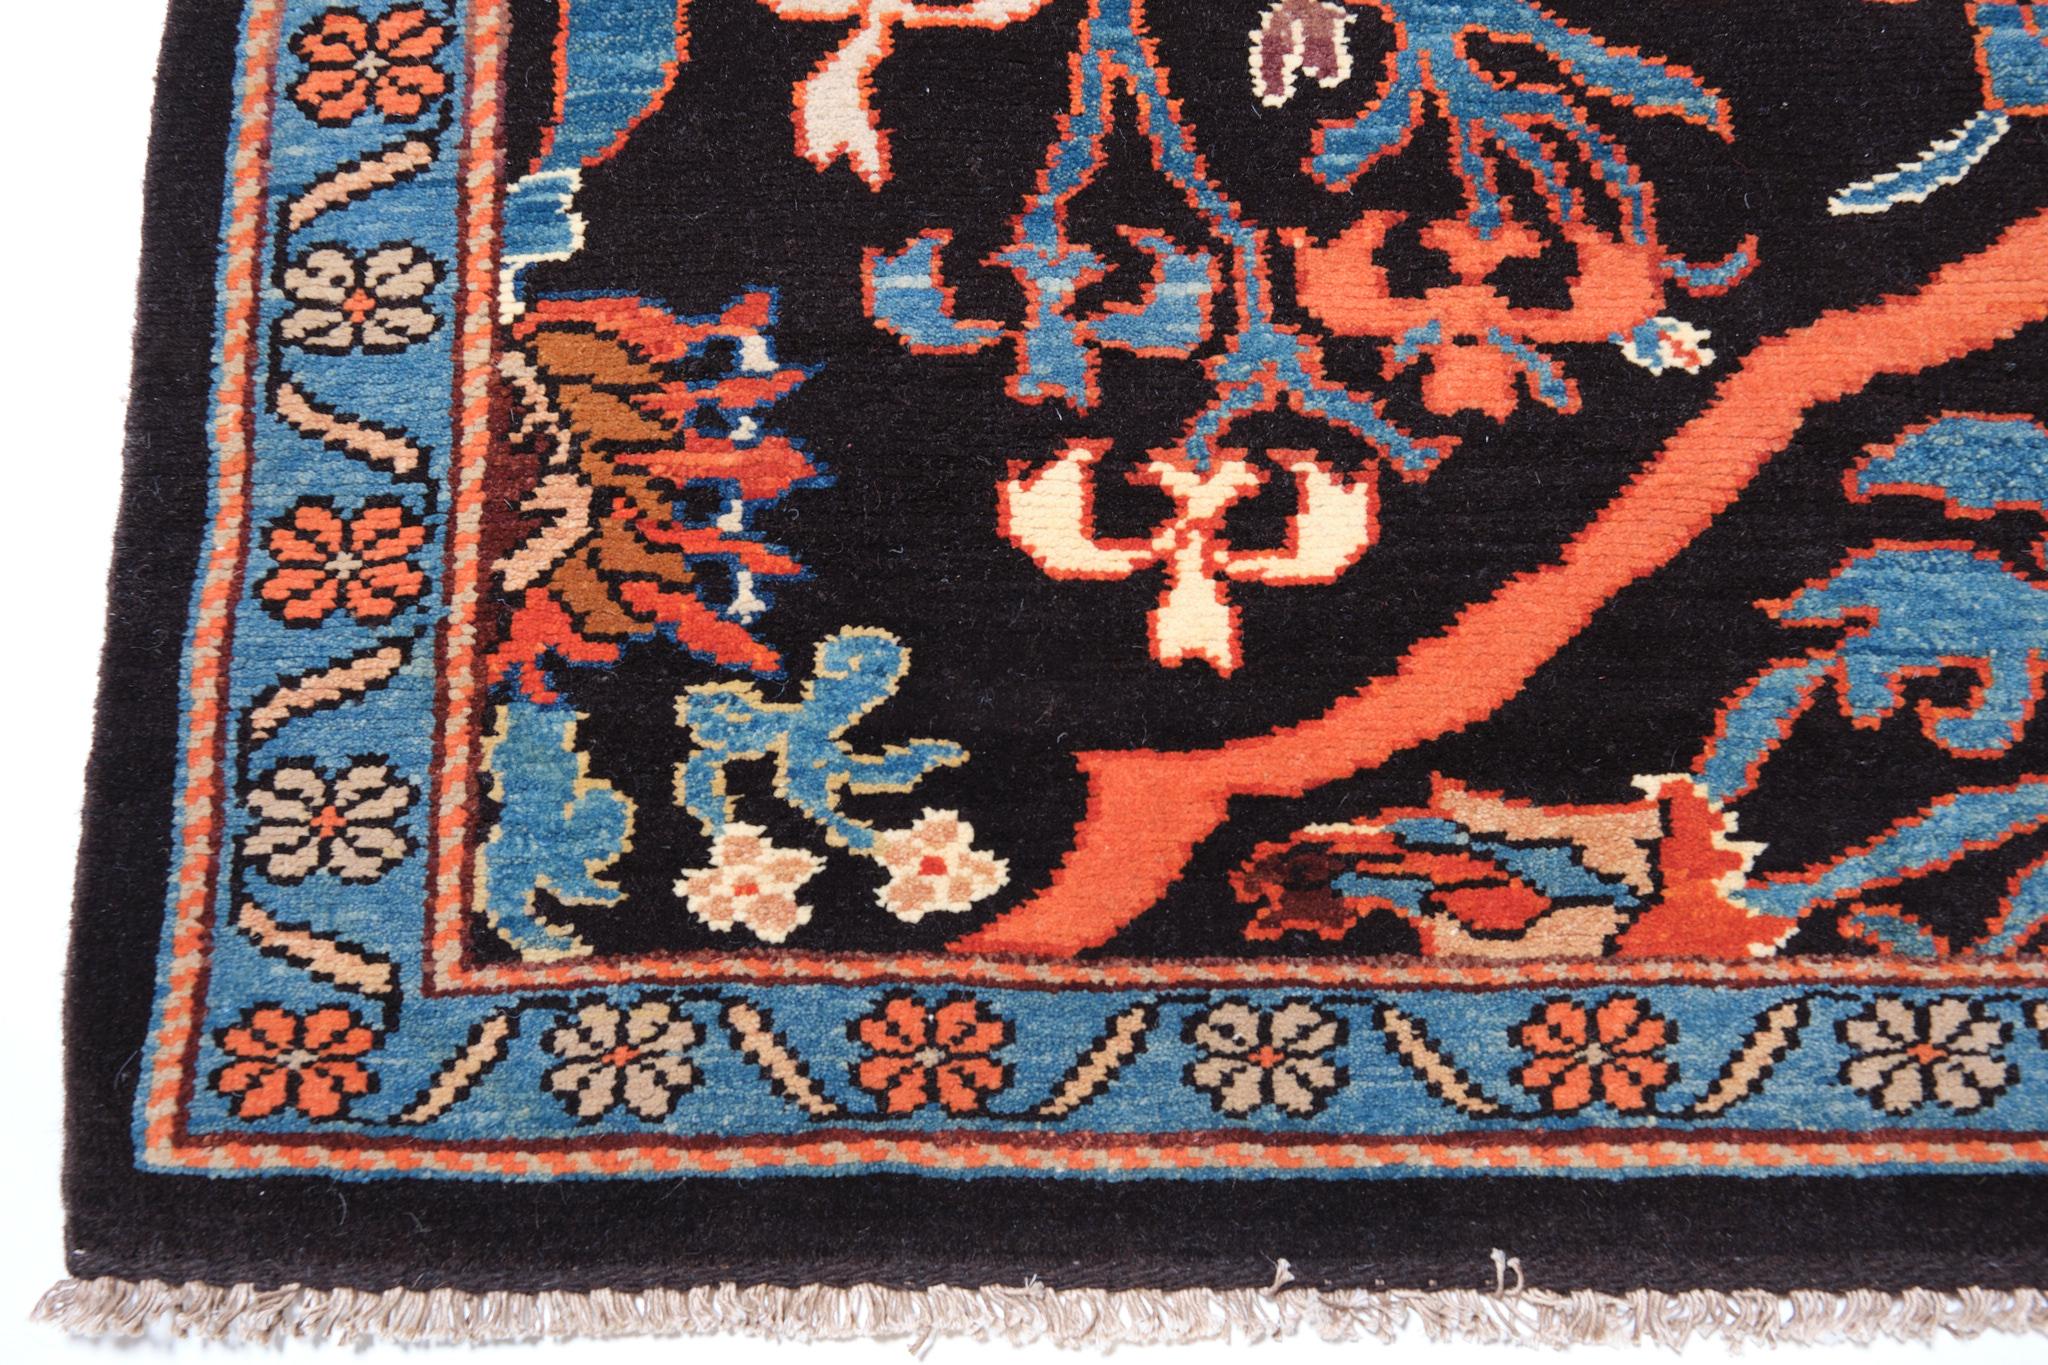 This is an arabesque style connected palmette and flowers designed carpet 19th century from Garrus ( Gerous or Garus ) region, Eastern Kurdistan area. Garrus is located in the foothills approaching the flatlands of Persia, Garrus has been a